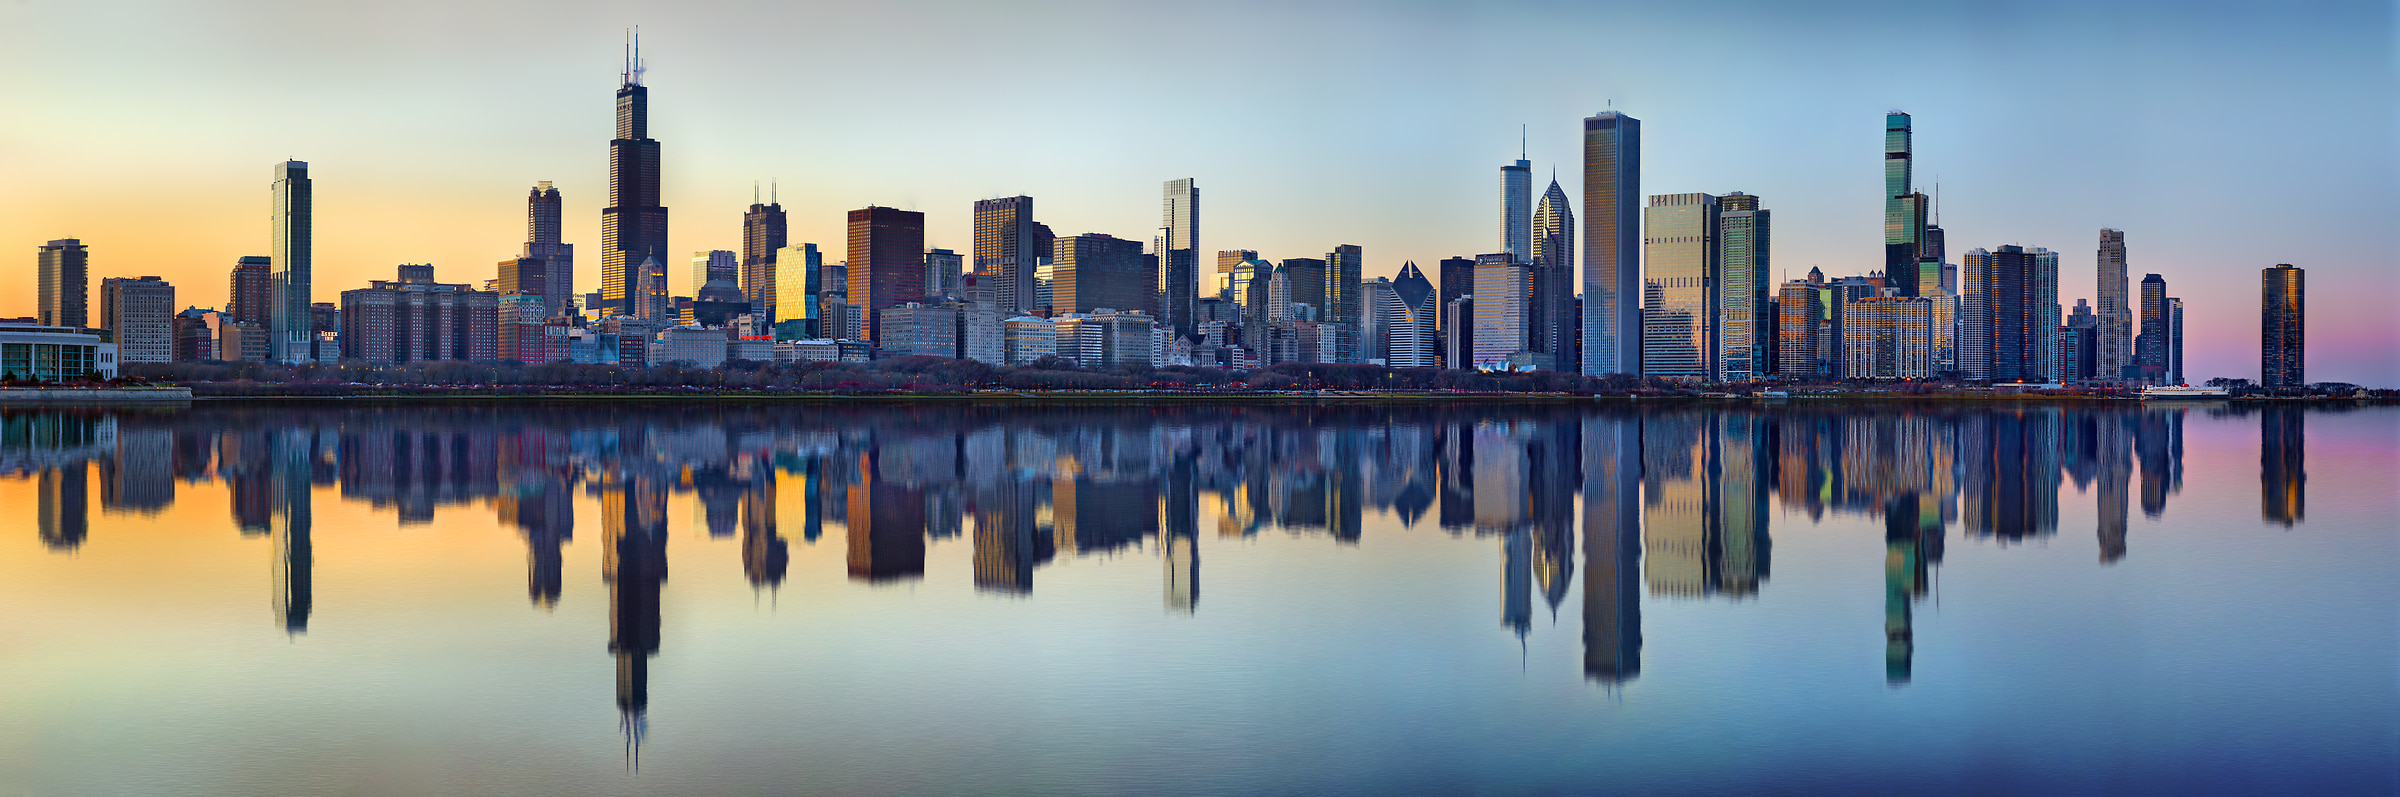 1,013 megapixels! A very high resolution, large-format VAST photo print of the Chicago skyline at sunset with Lake Michigan in the foreground; cityscape photograph created by Phil Crawshay in Chicago, Illinois